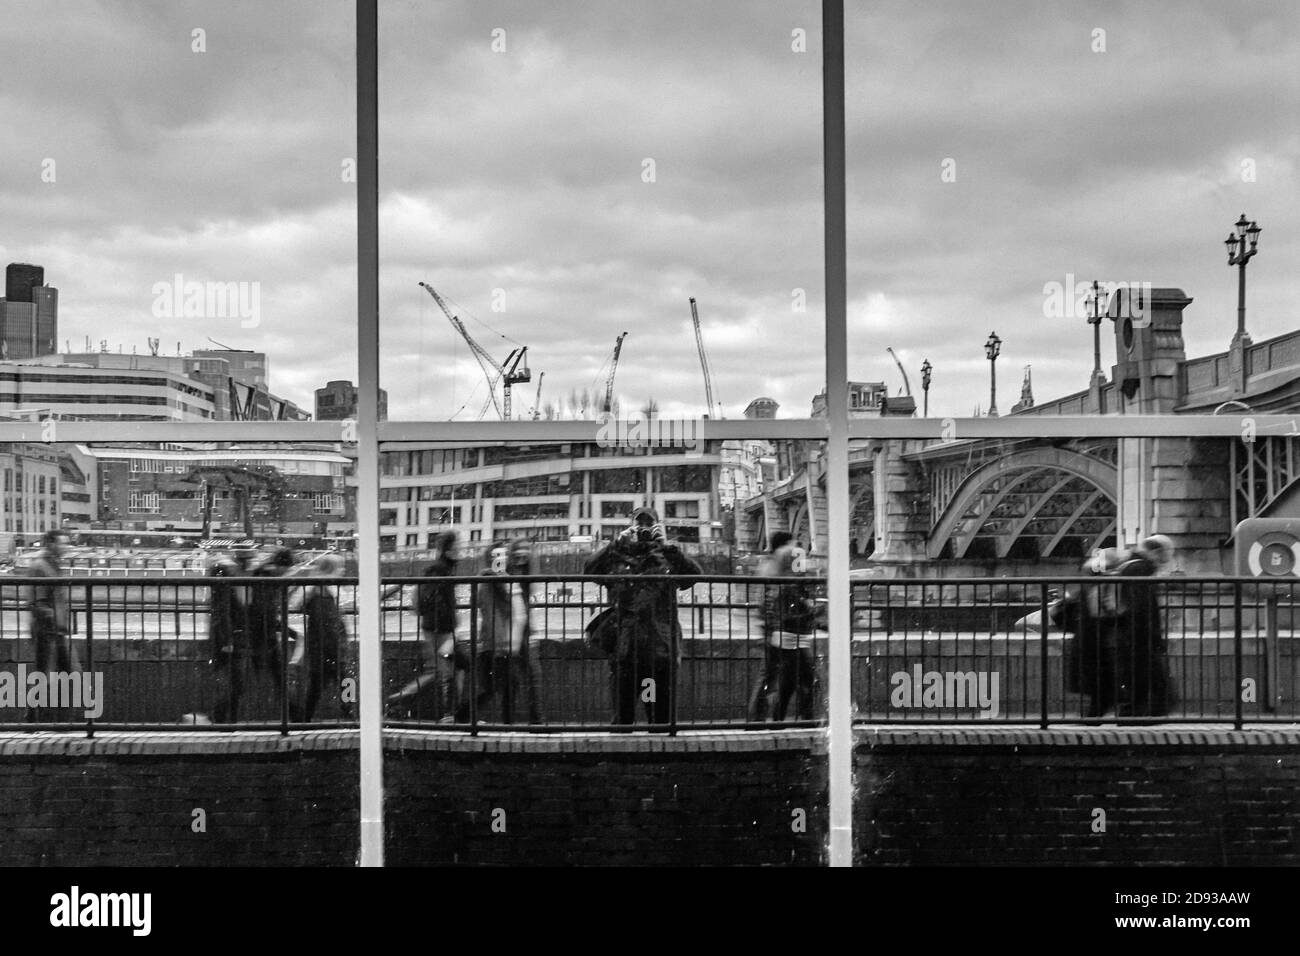 London, UK, December 7, 2013: passersby are reflected in a window at Southwark Bridge Road Stock Photo